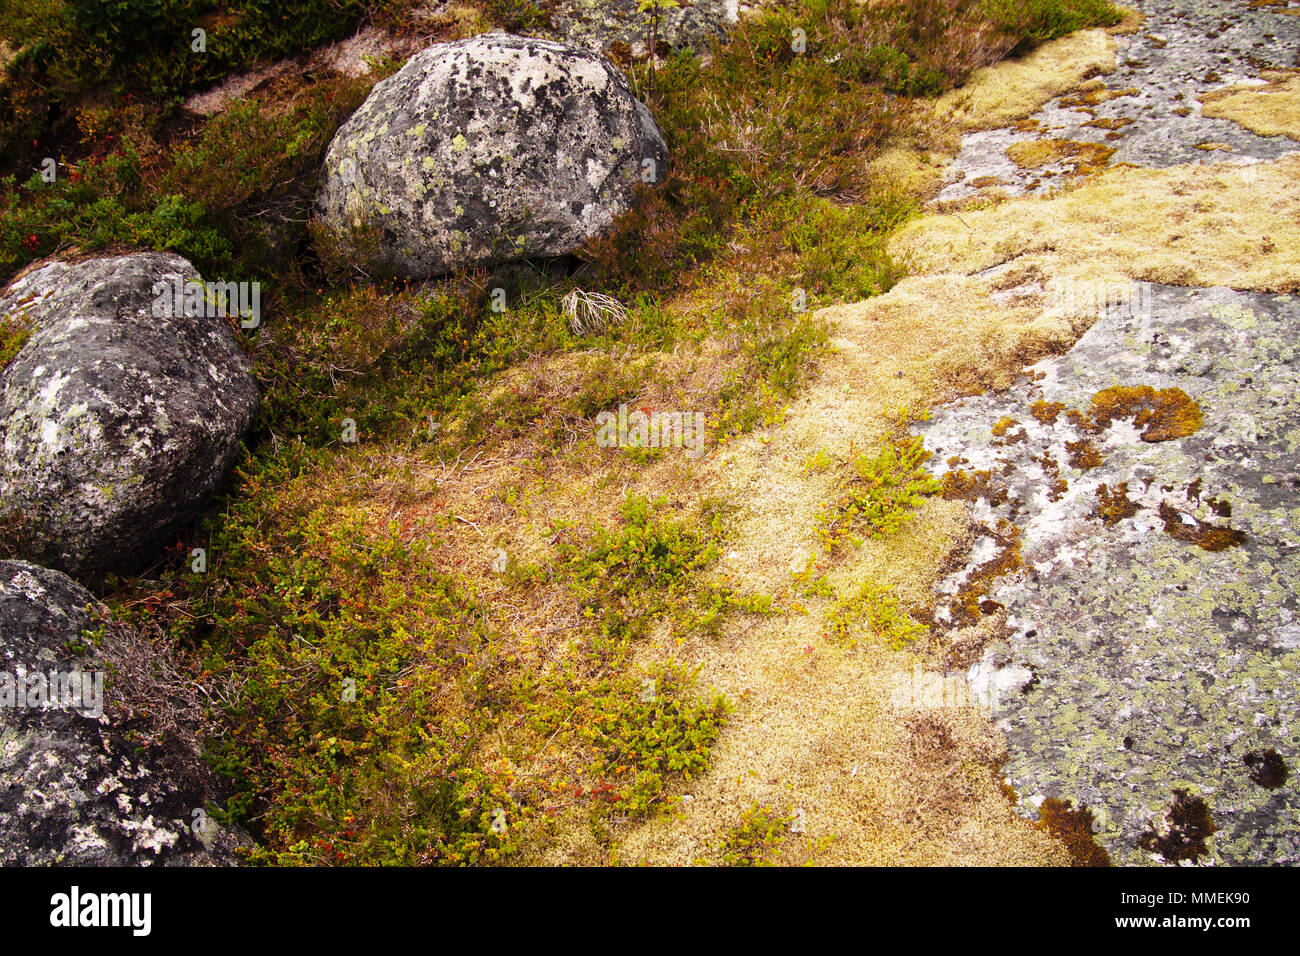 Succulents, moss and heath growing between rocks. The rocks are covered with lichen. Stock Photo